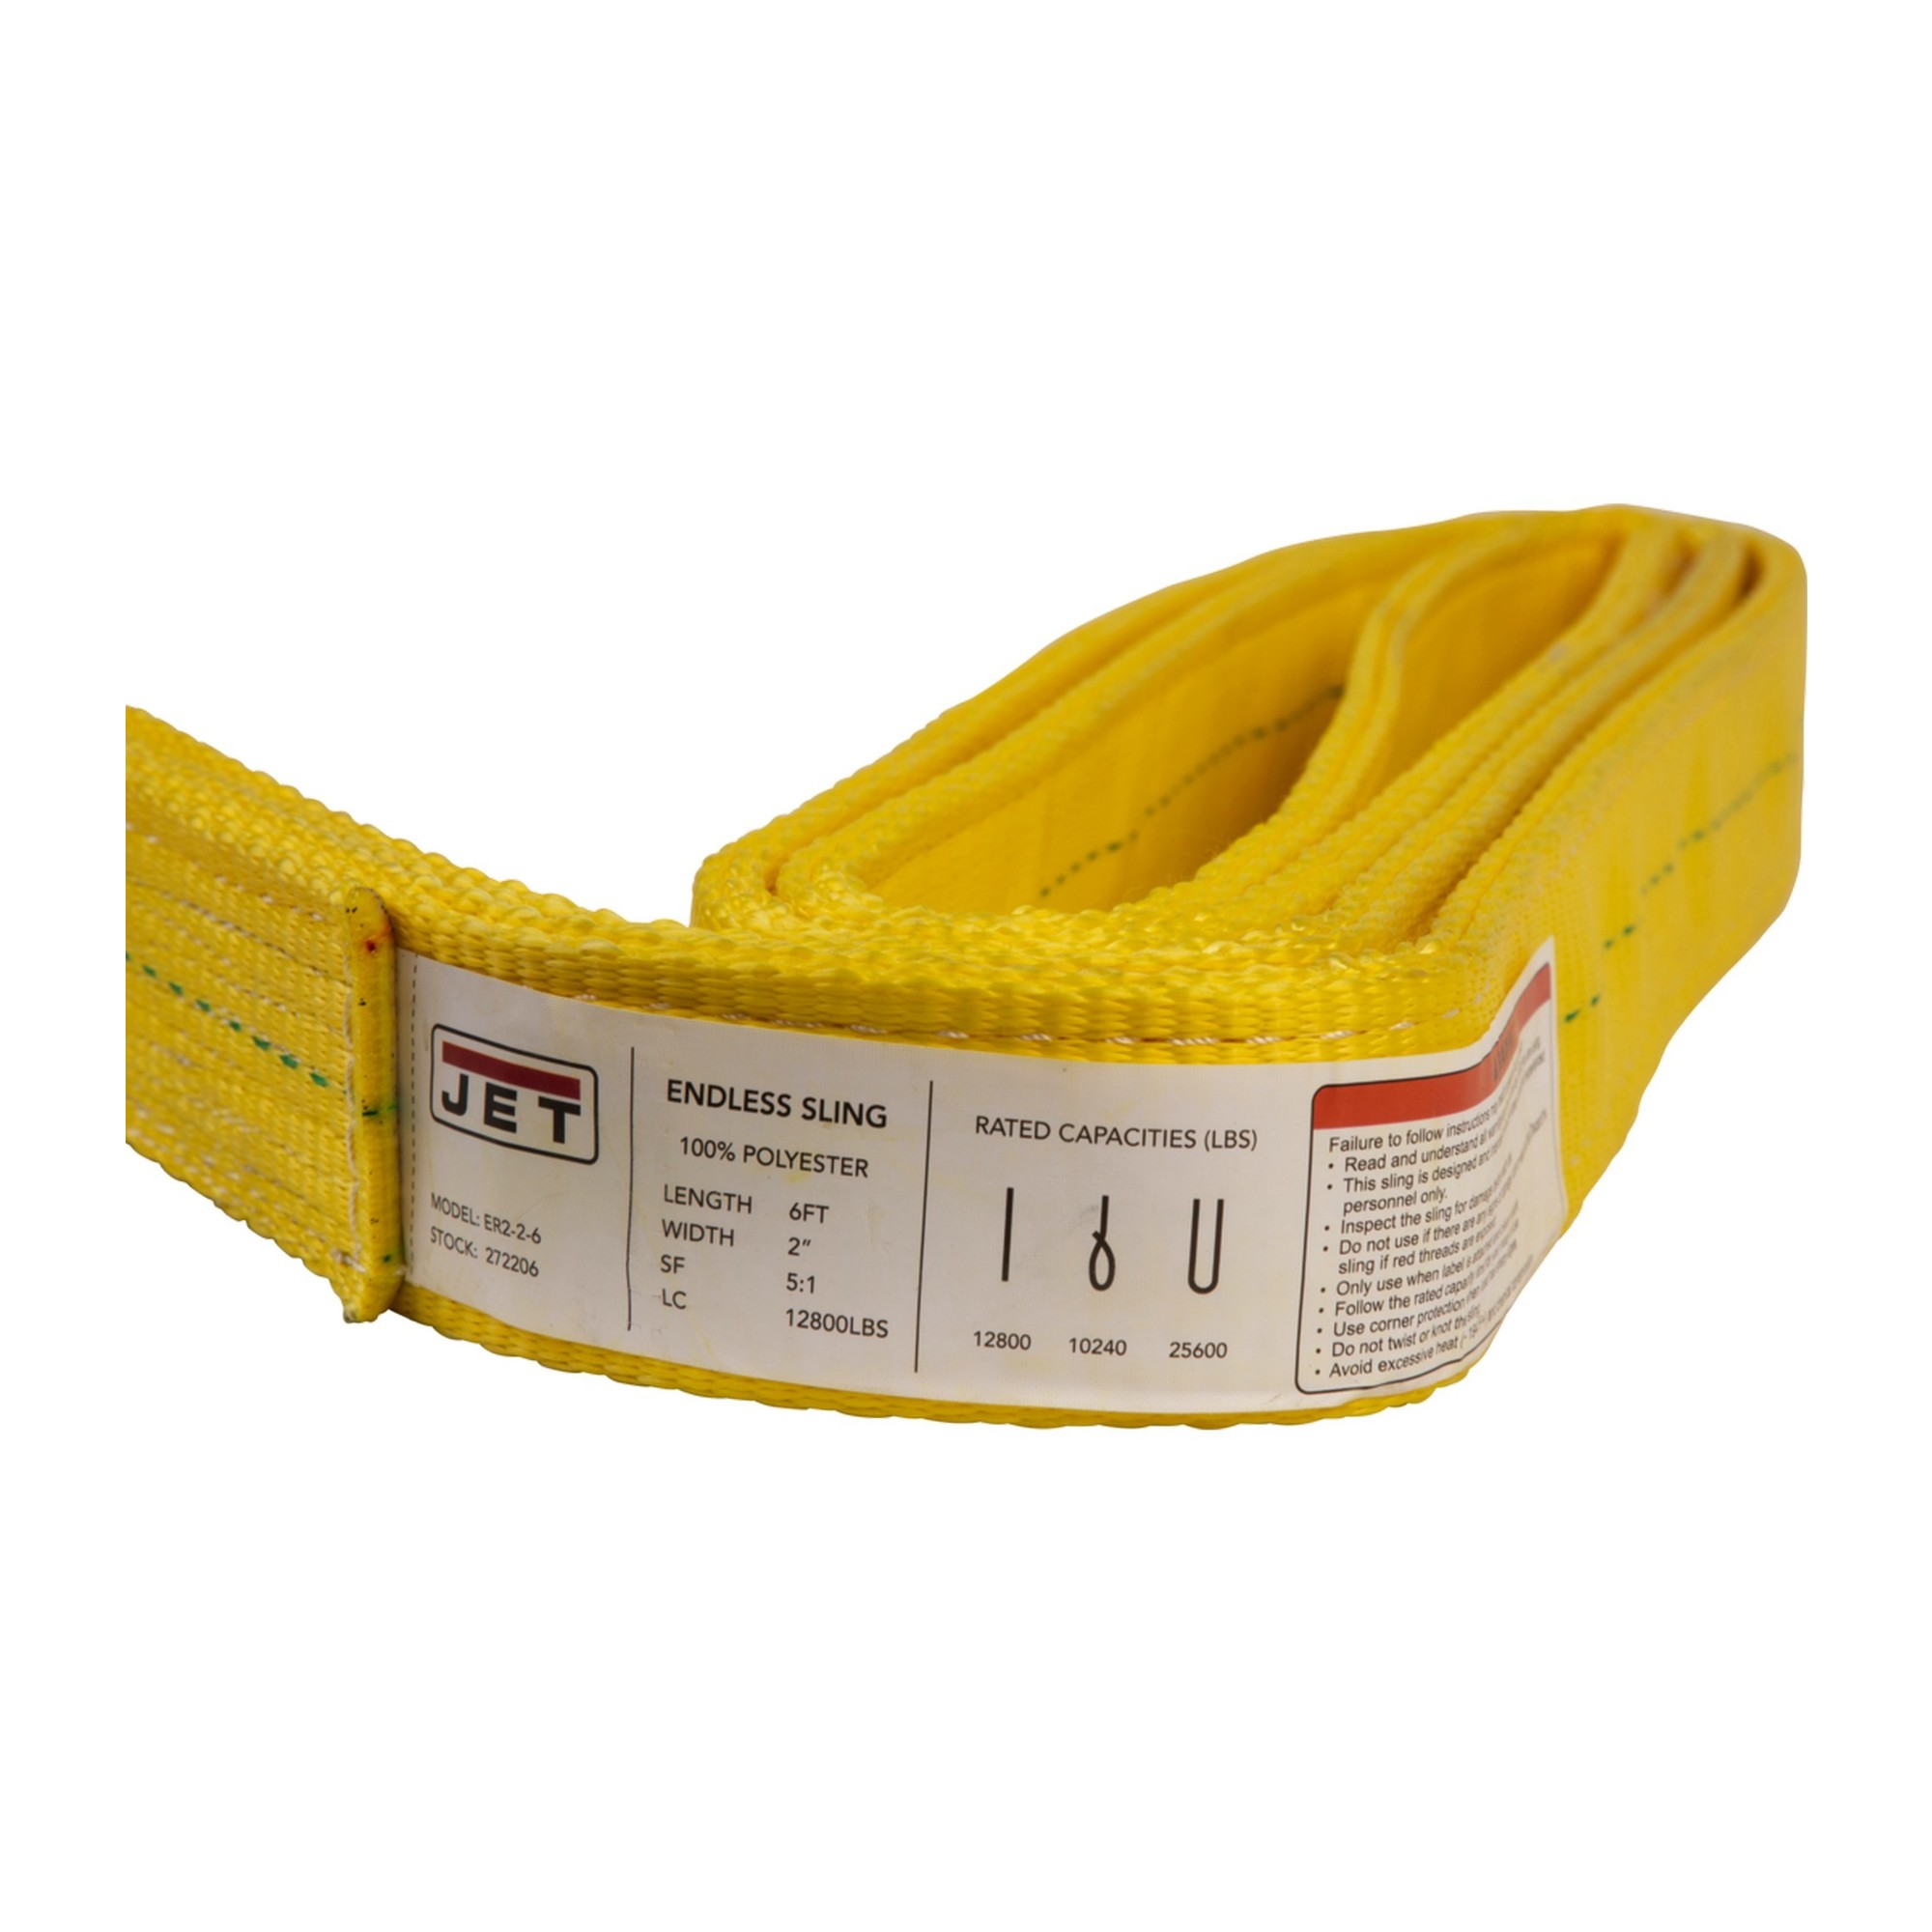 Jet, 272,208, Endless 2-Ply Polyester 2Inch x 8ft. Web Sling, Working Load 12800 lb, Straps (qty.) 1, Breaking Strength 12800 lb, Model 272208